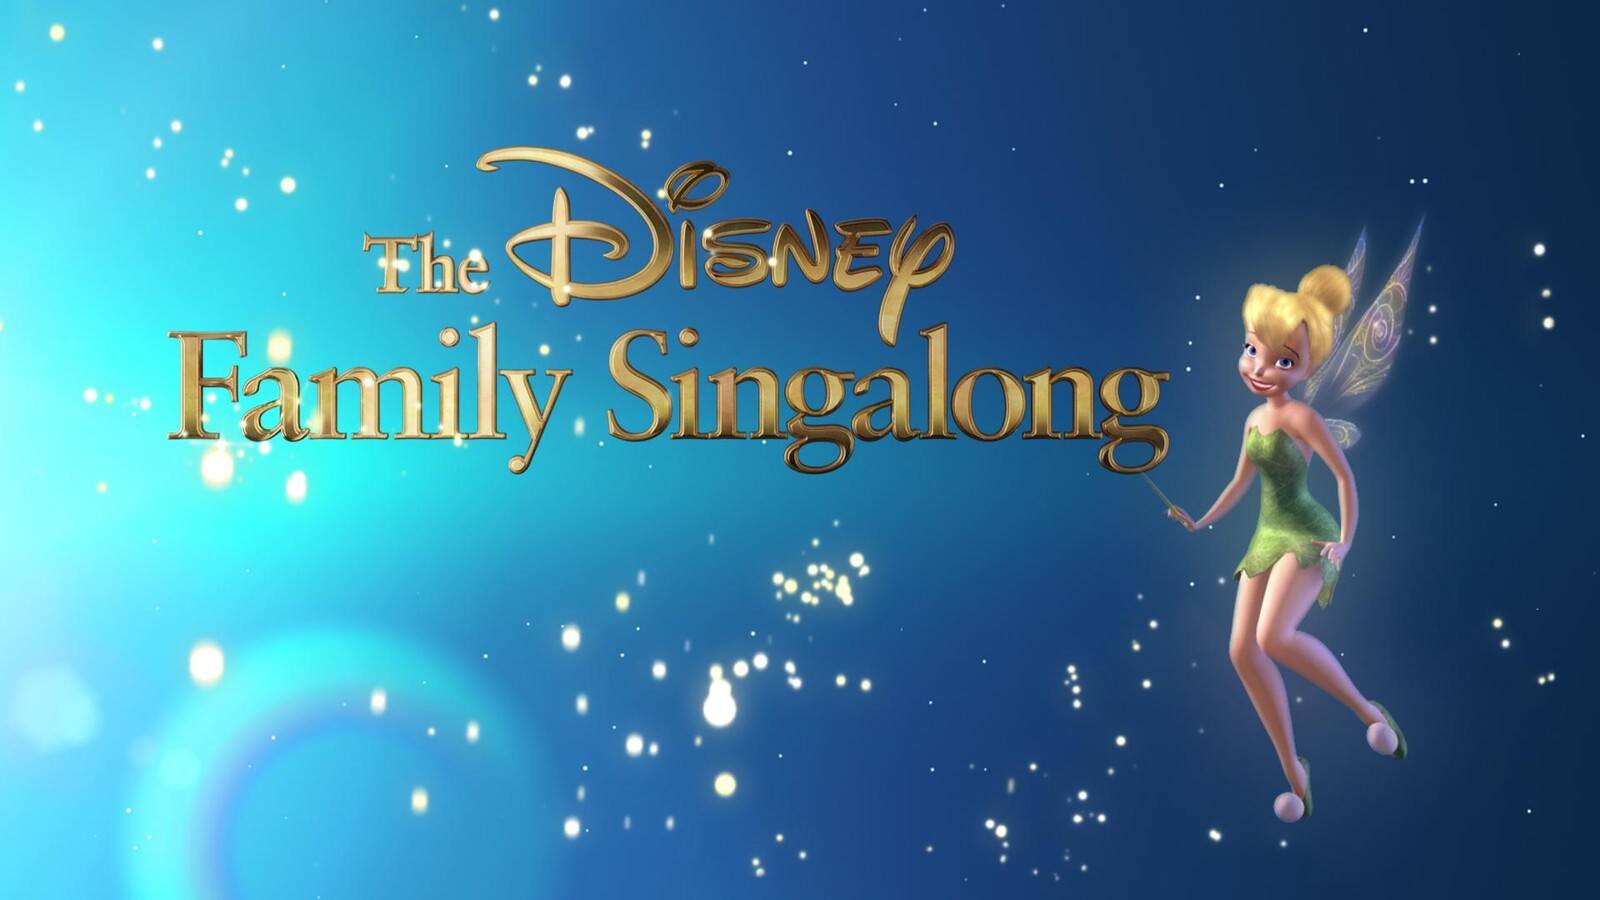 How to Watch The Disney Family Singalong Volume II This Sunday